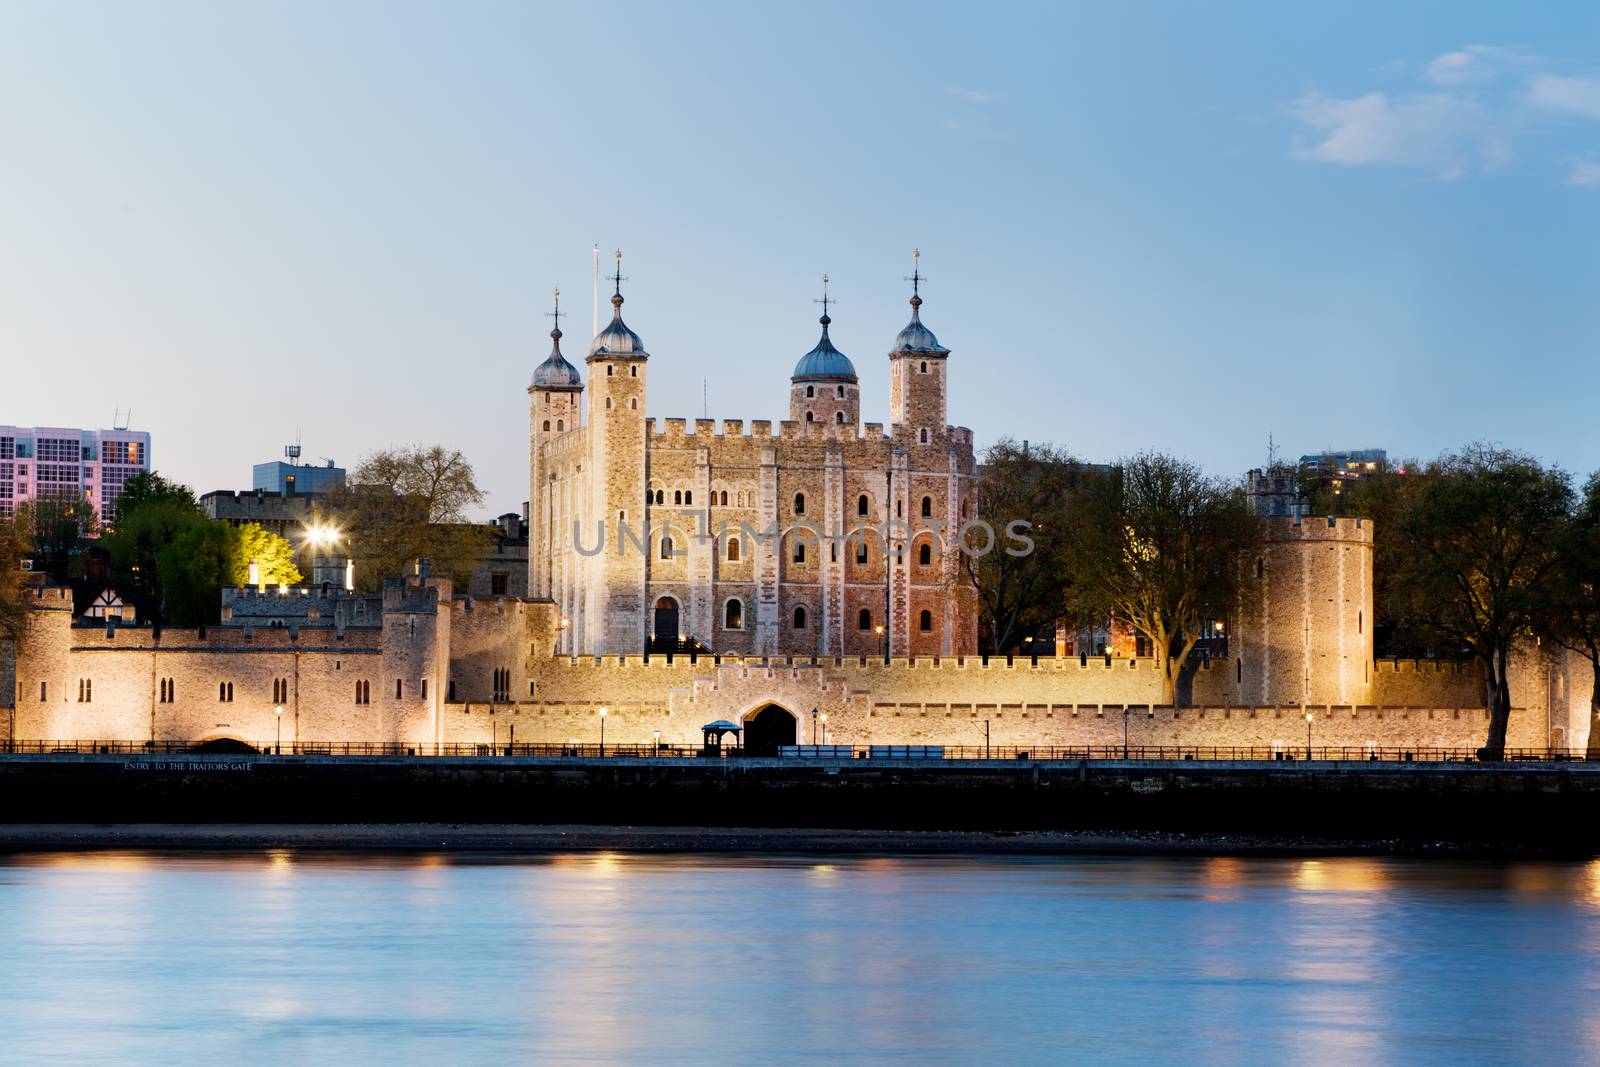 The Tower of London, England, the UK. The historic Royal Palace and Fortress next to the River Thames. Lights at the evening